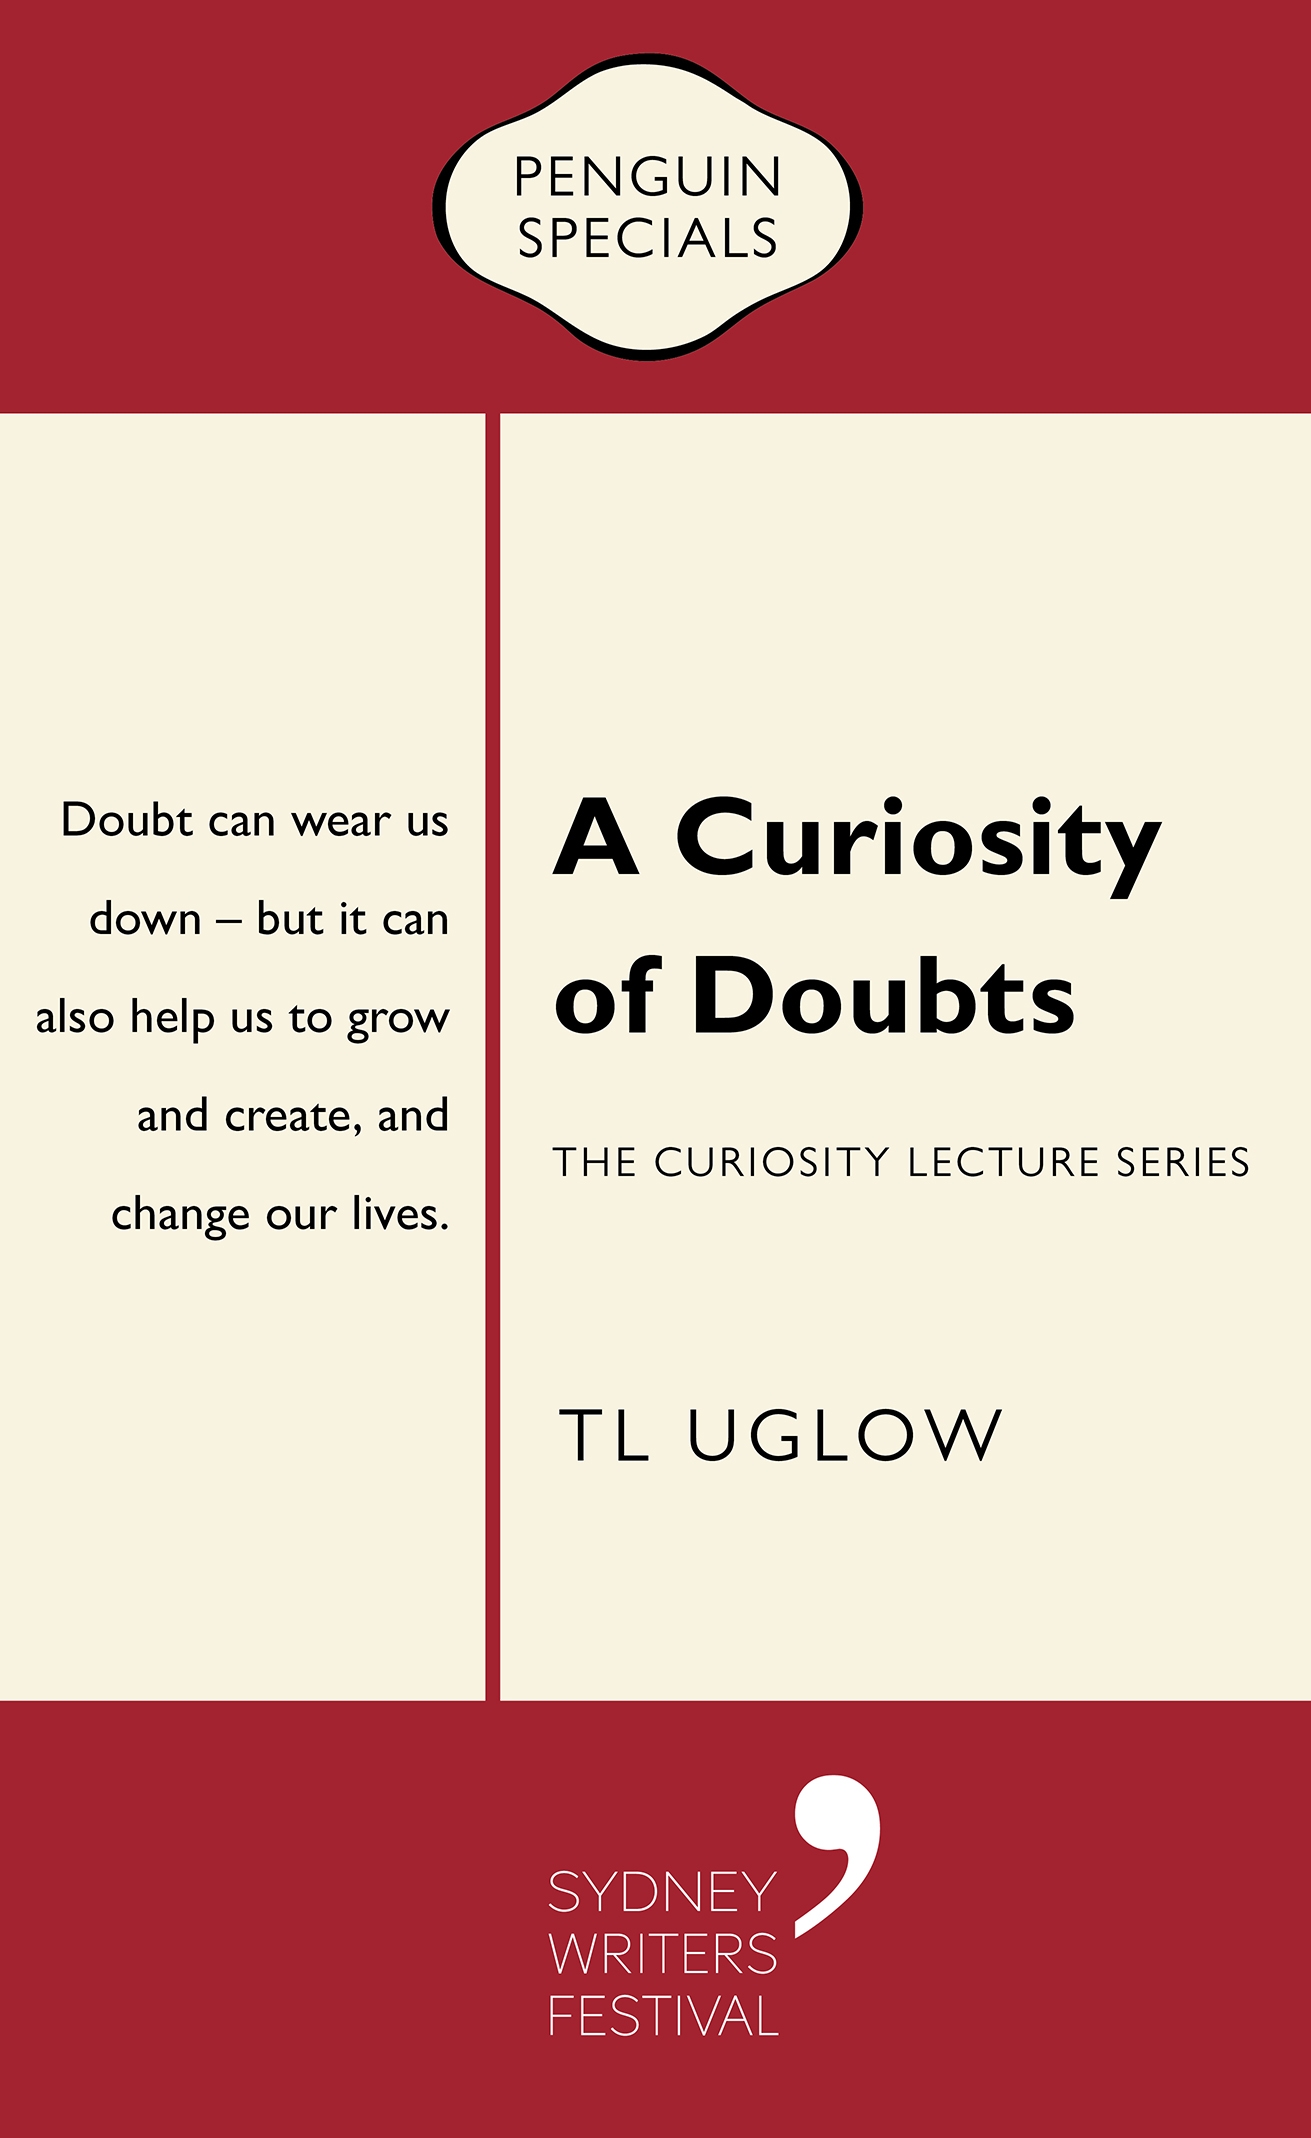 A Curiosity of Doubts book cover